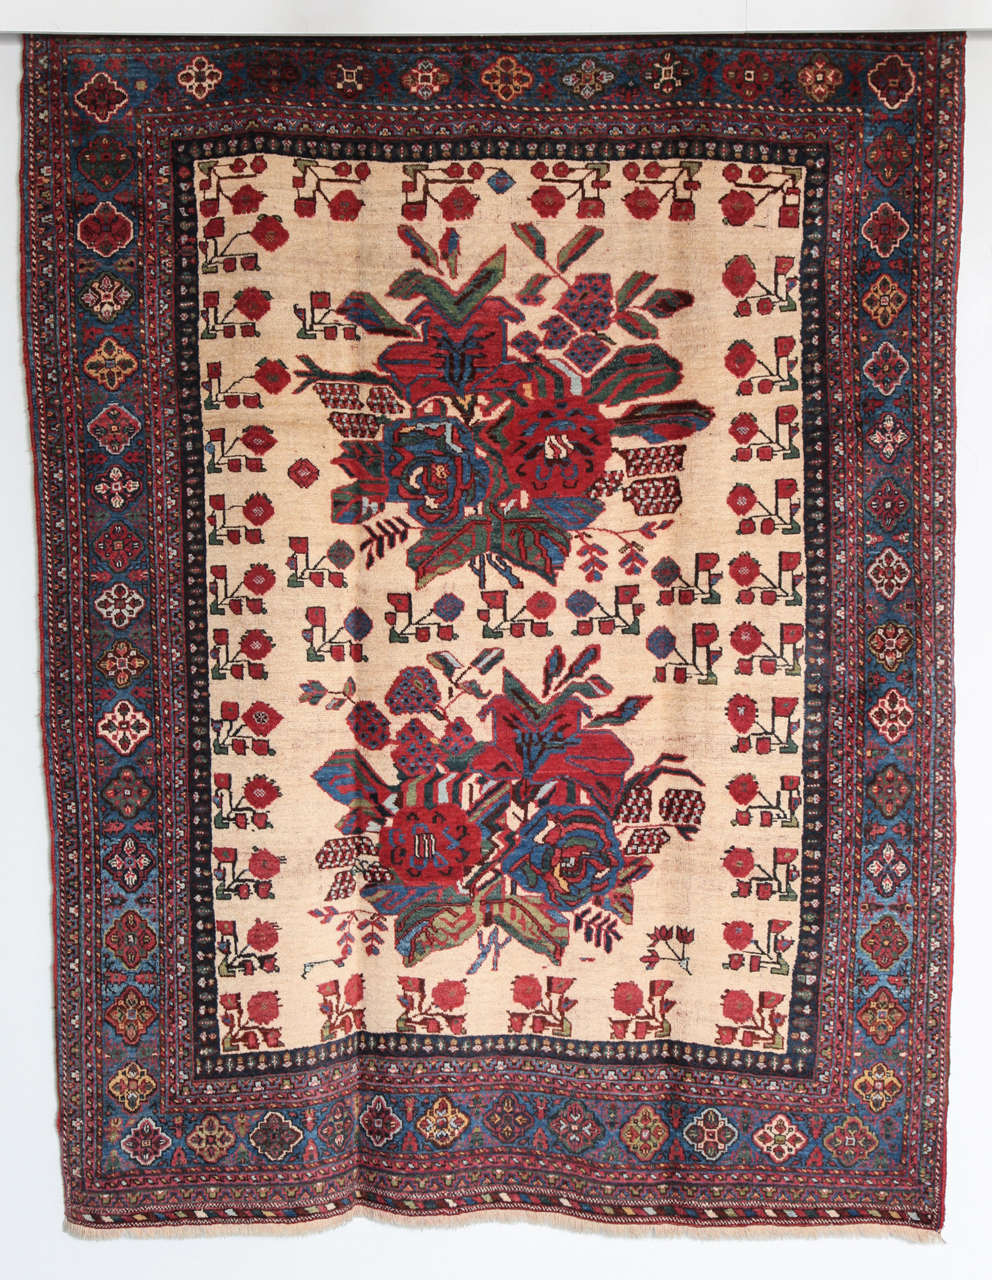 This Persian Afshar carpet circa 1890 consists of a hand-knotted handspun wool pile and natural vegetable dyes. It is a marriage carpet from the village of Heriz and features two central bouquets of flowers in red, blue and green amid a bright cream